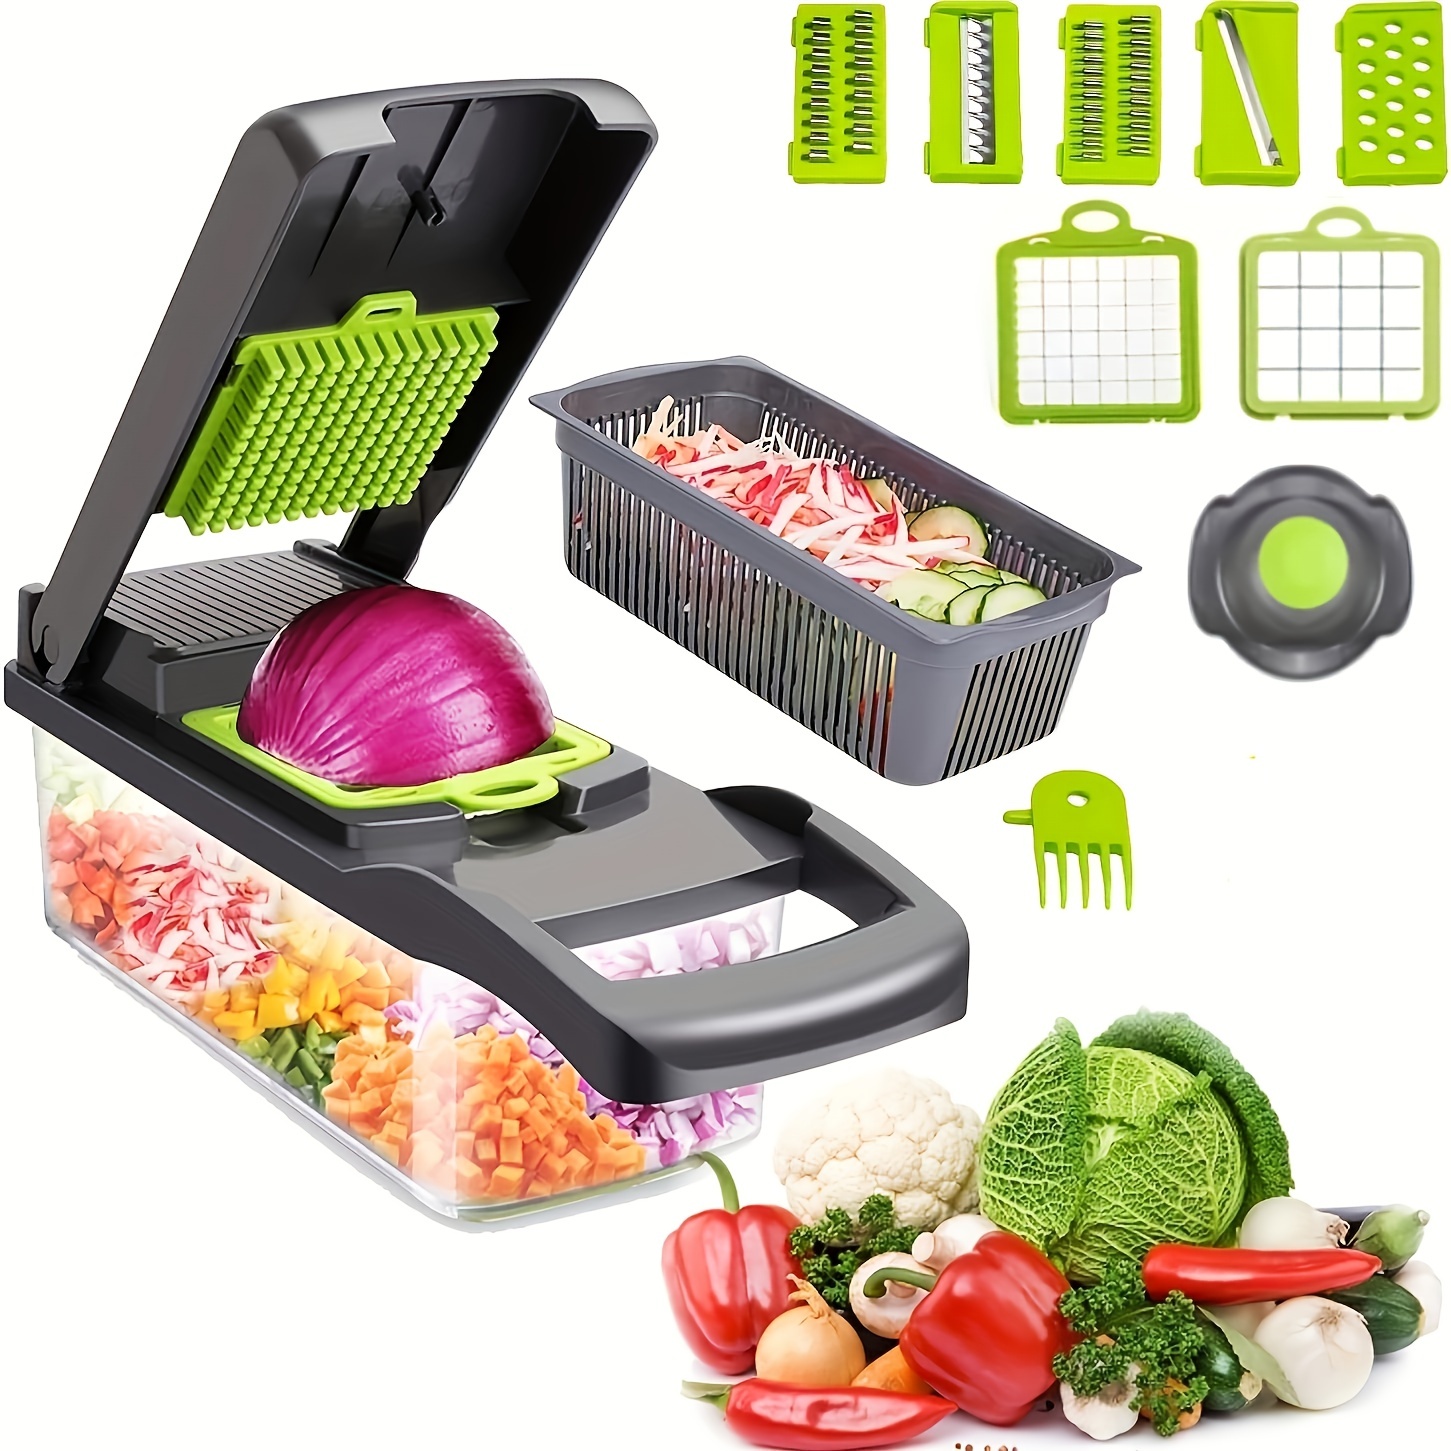 Vegetable Chopper, Multifunctional Food Chopper, Onion Chopper, Kitchen Vegetable  Slicer Dicer Cutter, Chopper With Container